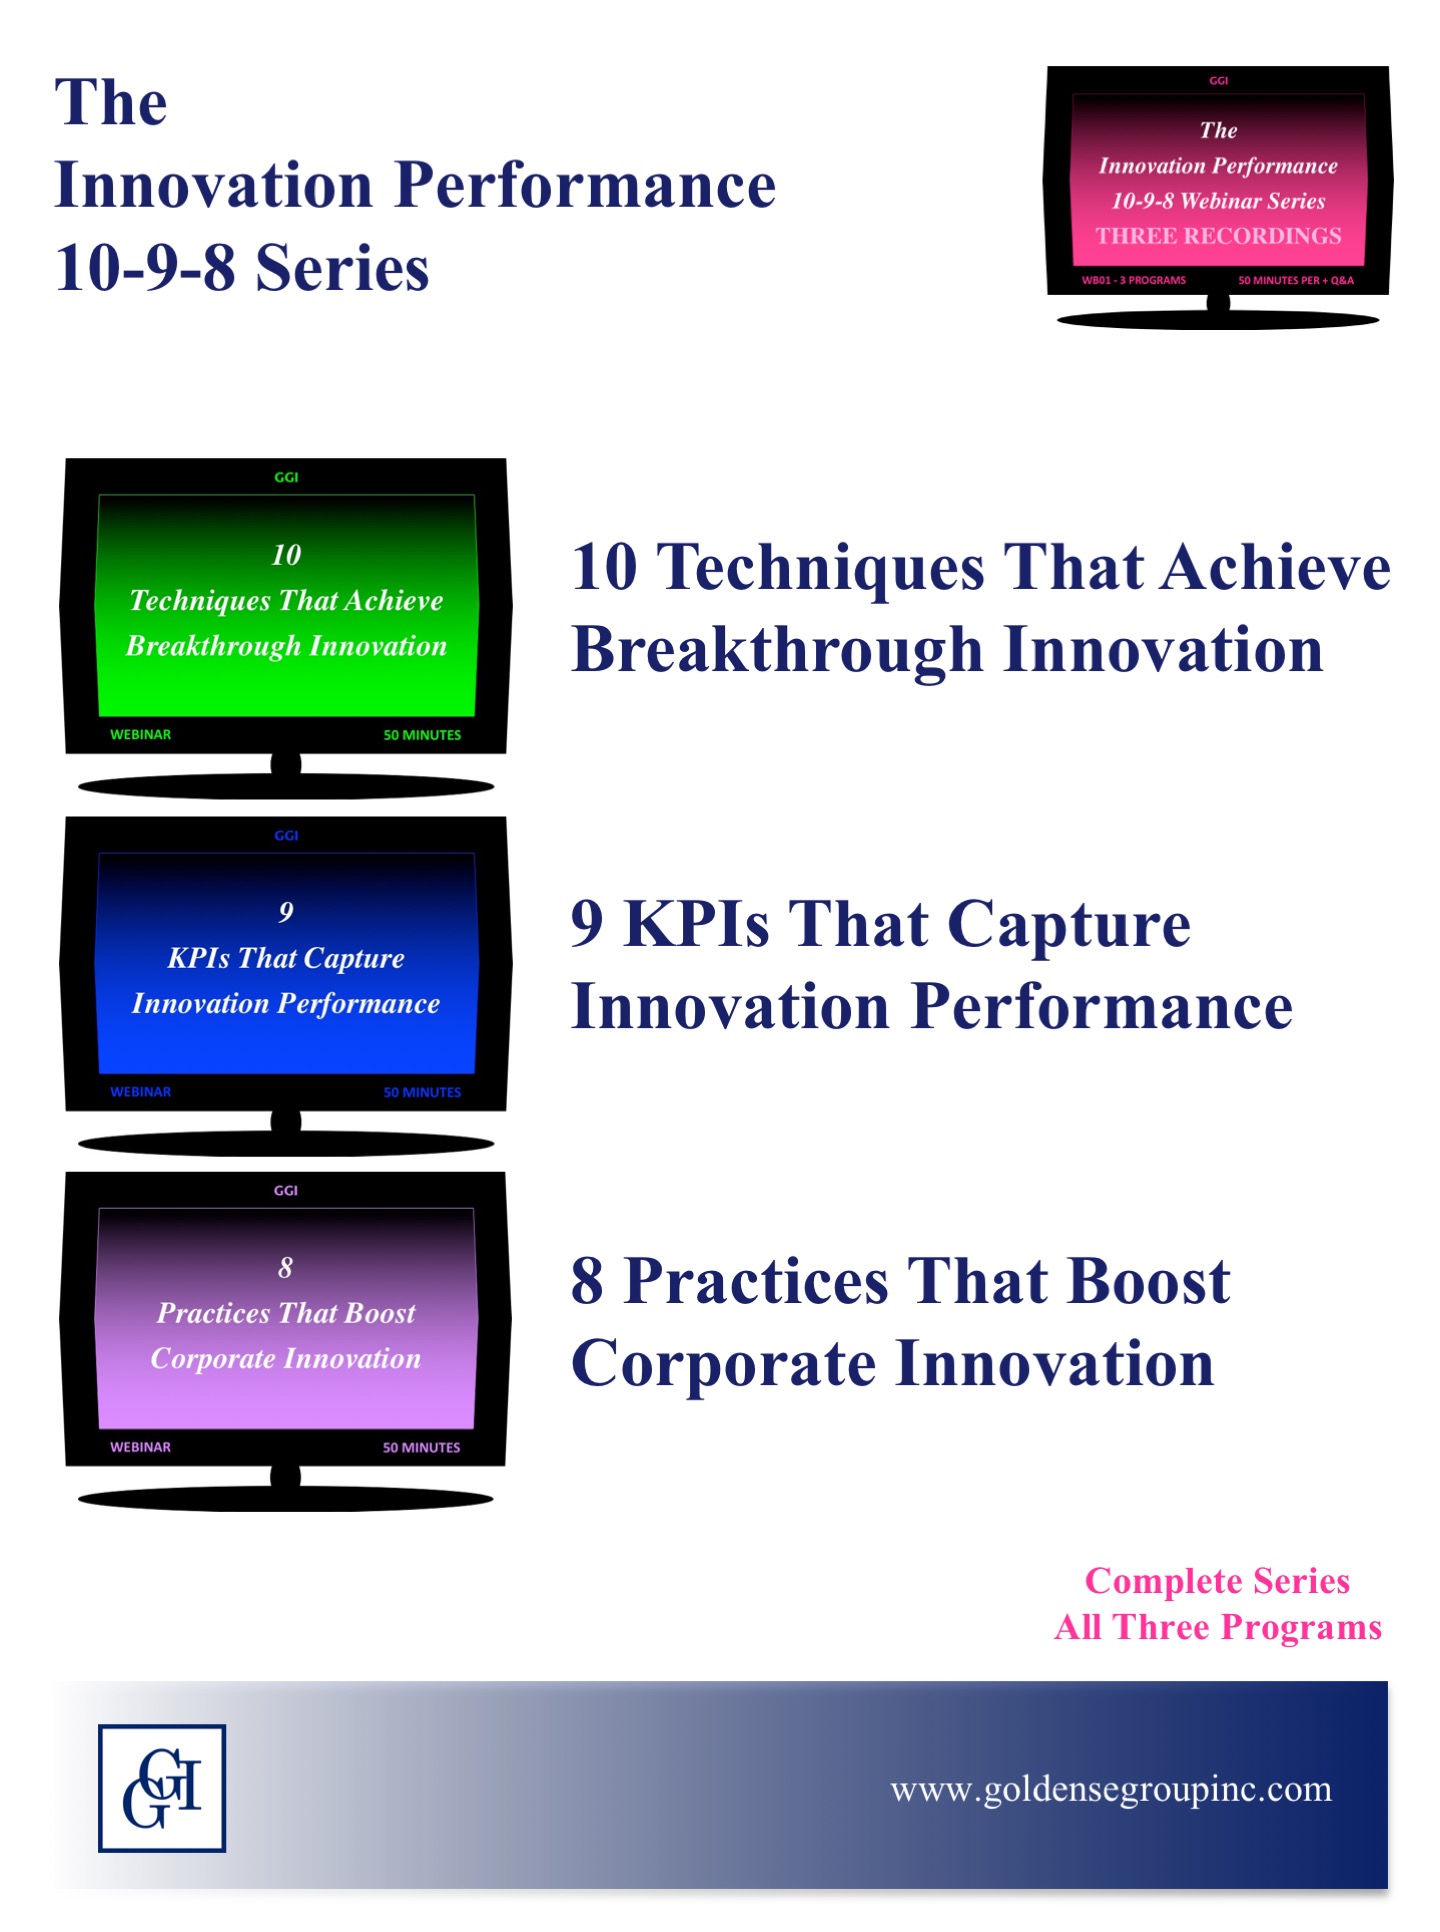 The Innovation Performance 10-9-8 Series